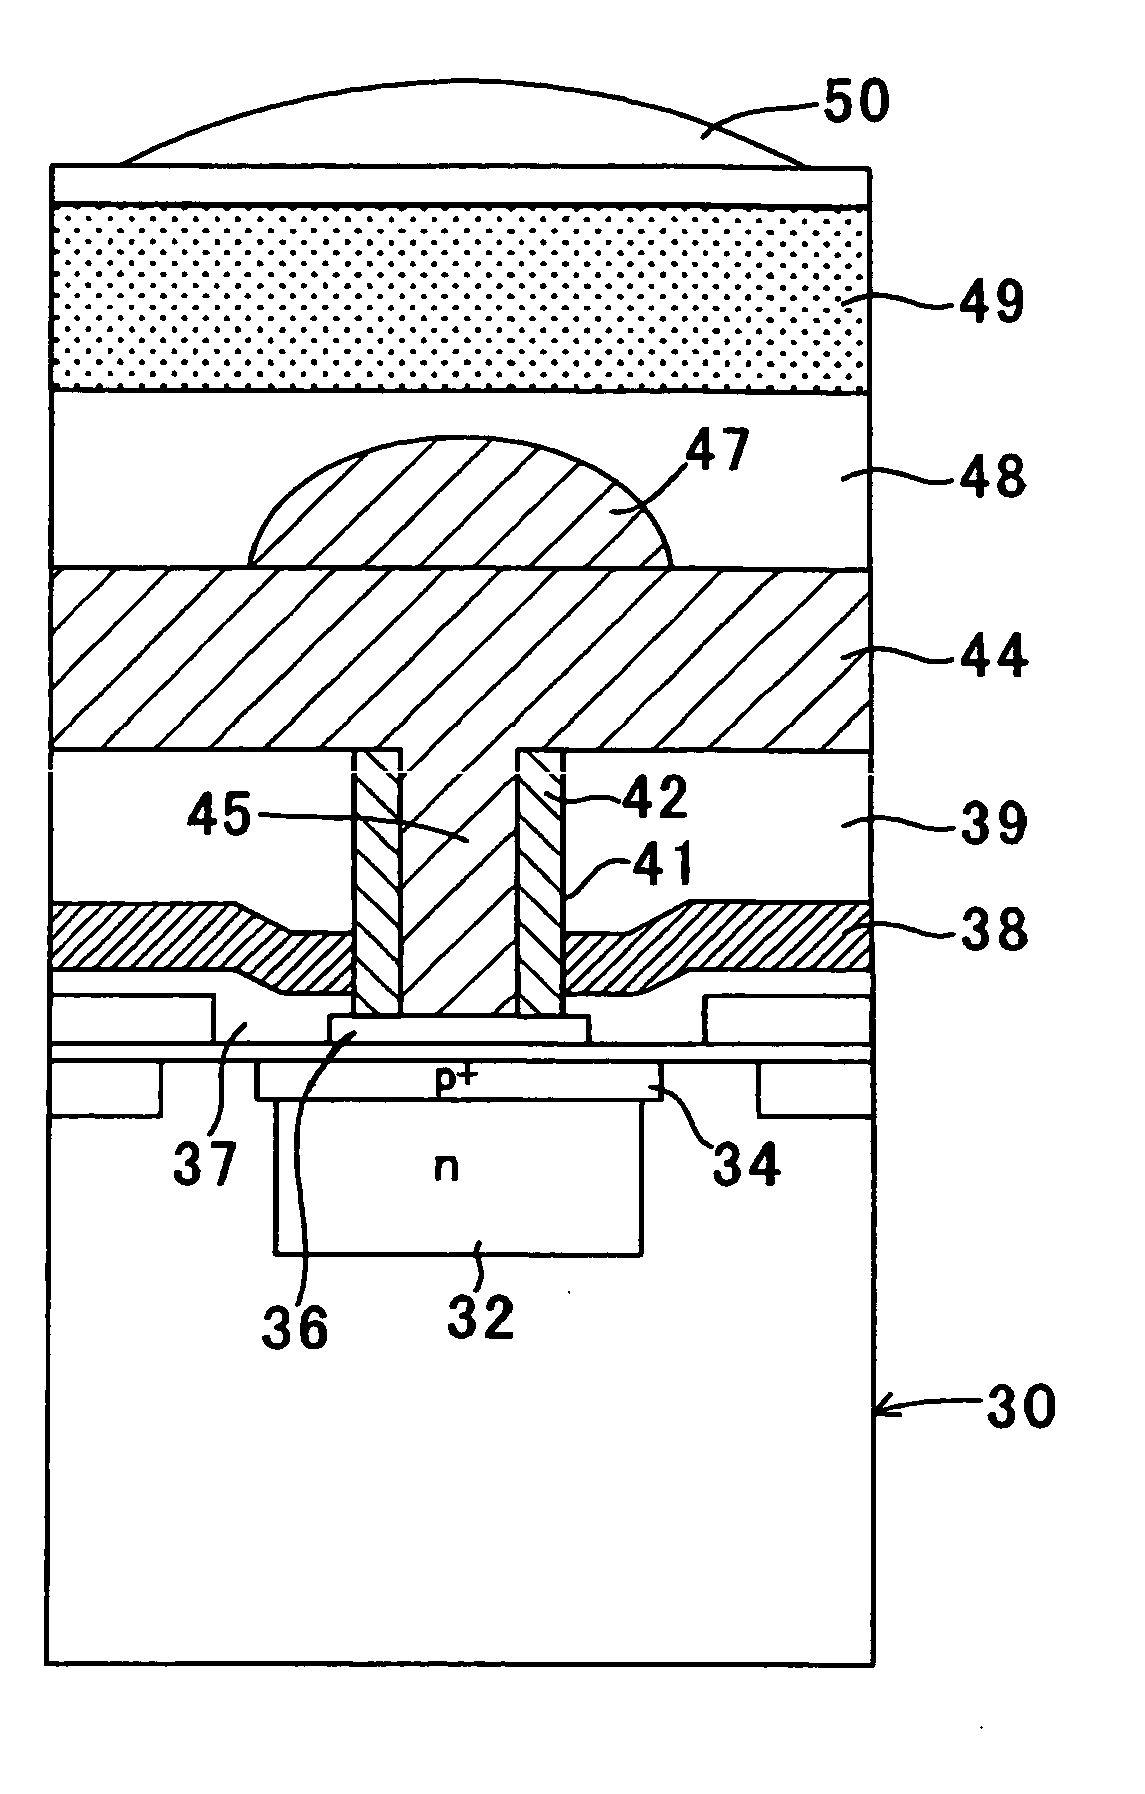 Method of manufacturing a solid-state imaging device